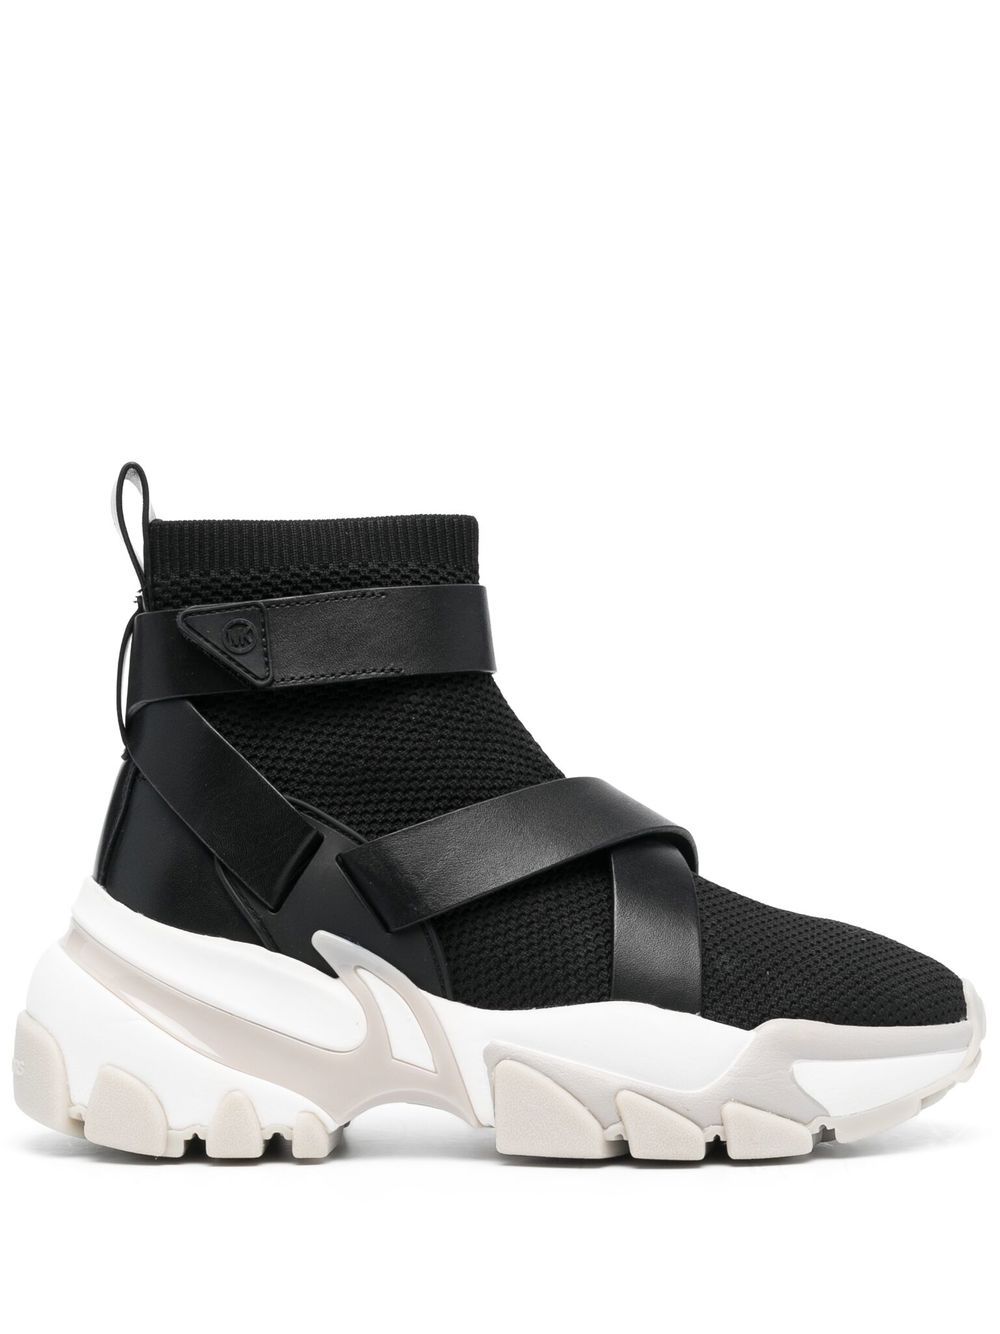 Nick strap sneaker boots